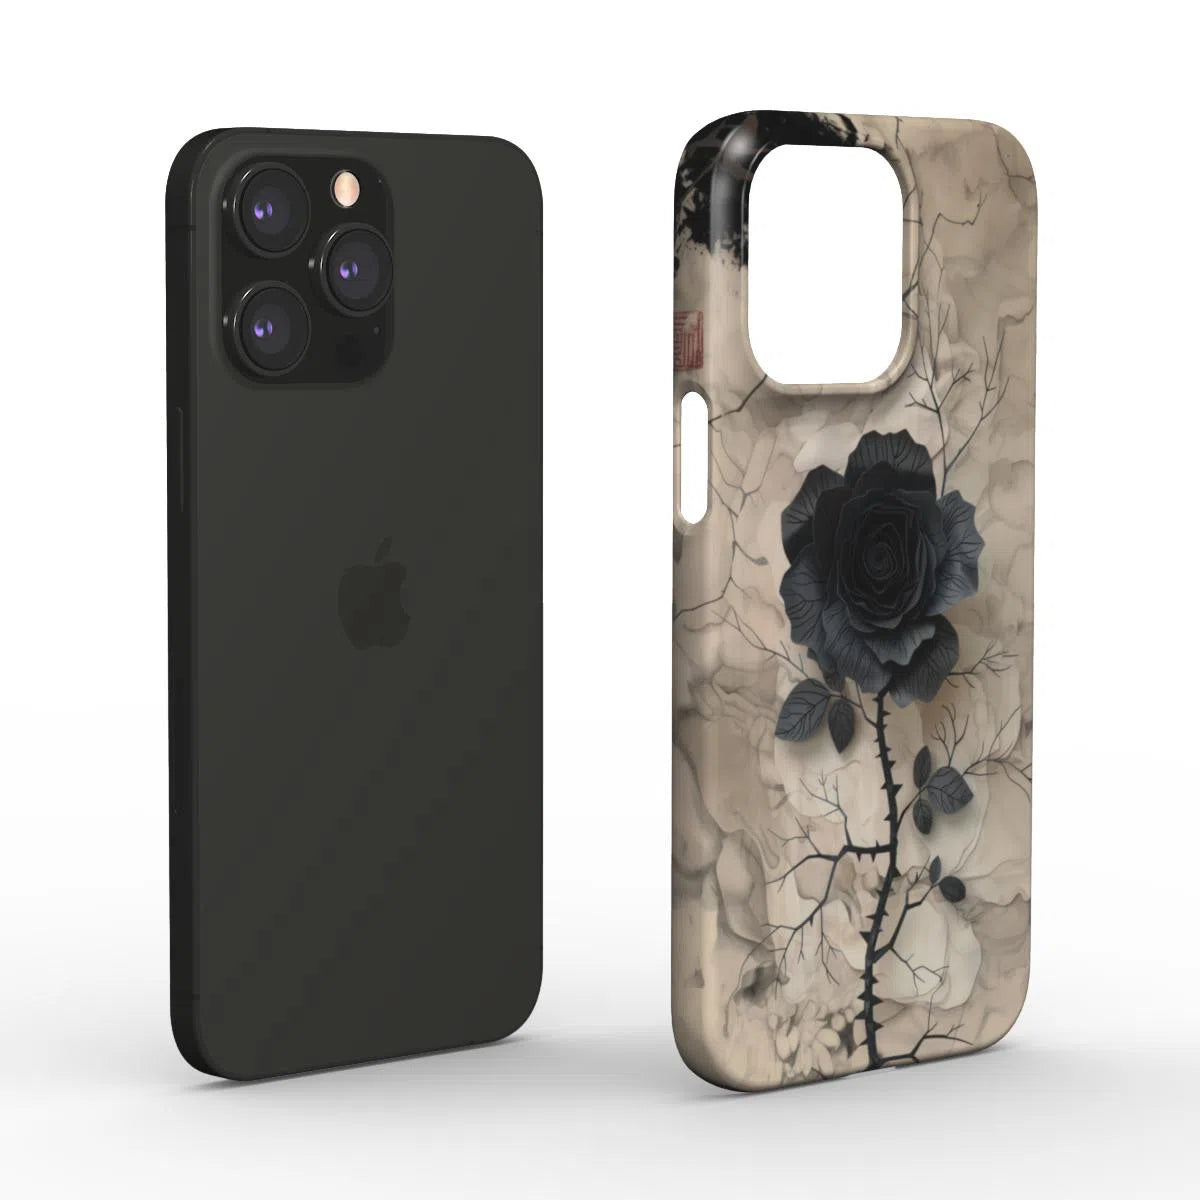 A Monochrome Elegance: The Rose of Shadows Snap Phone Case